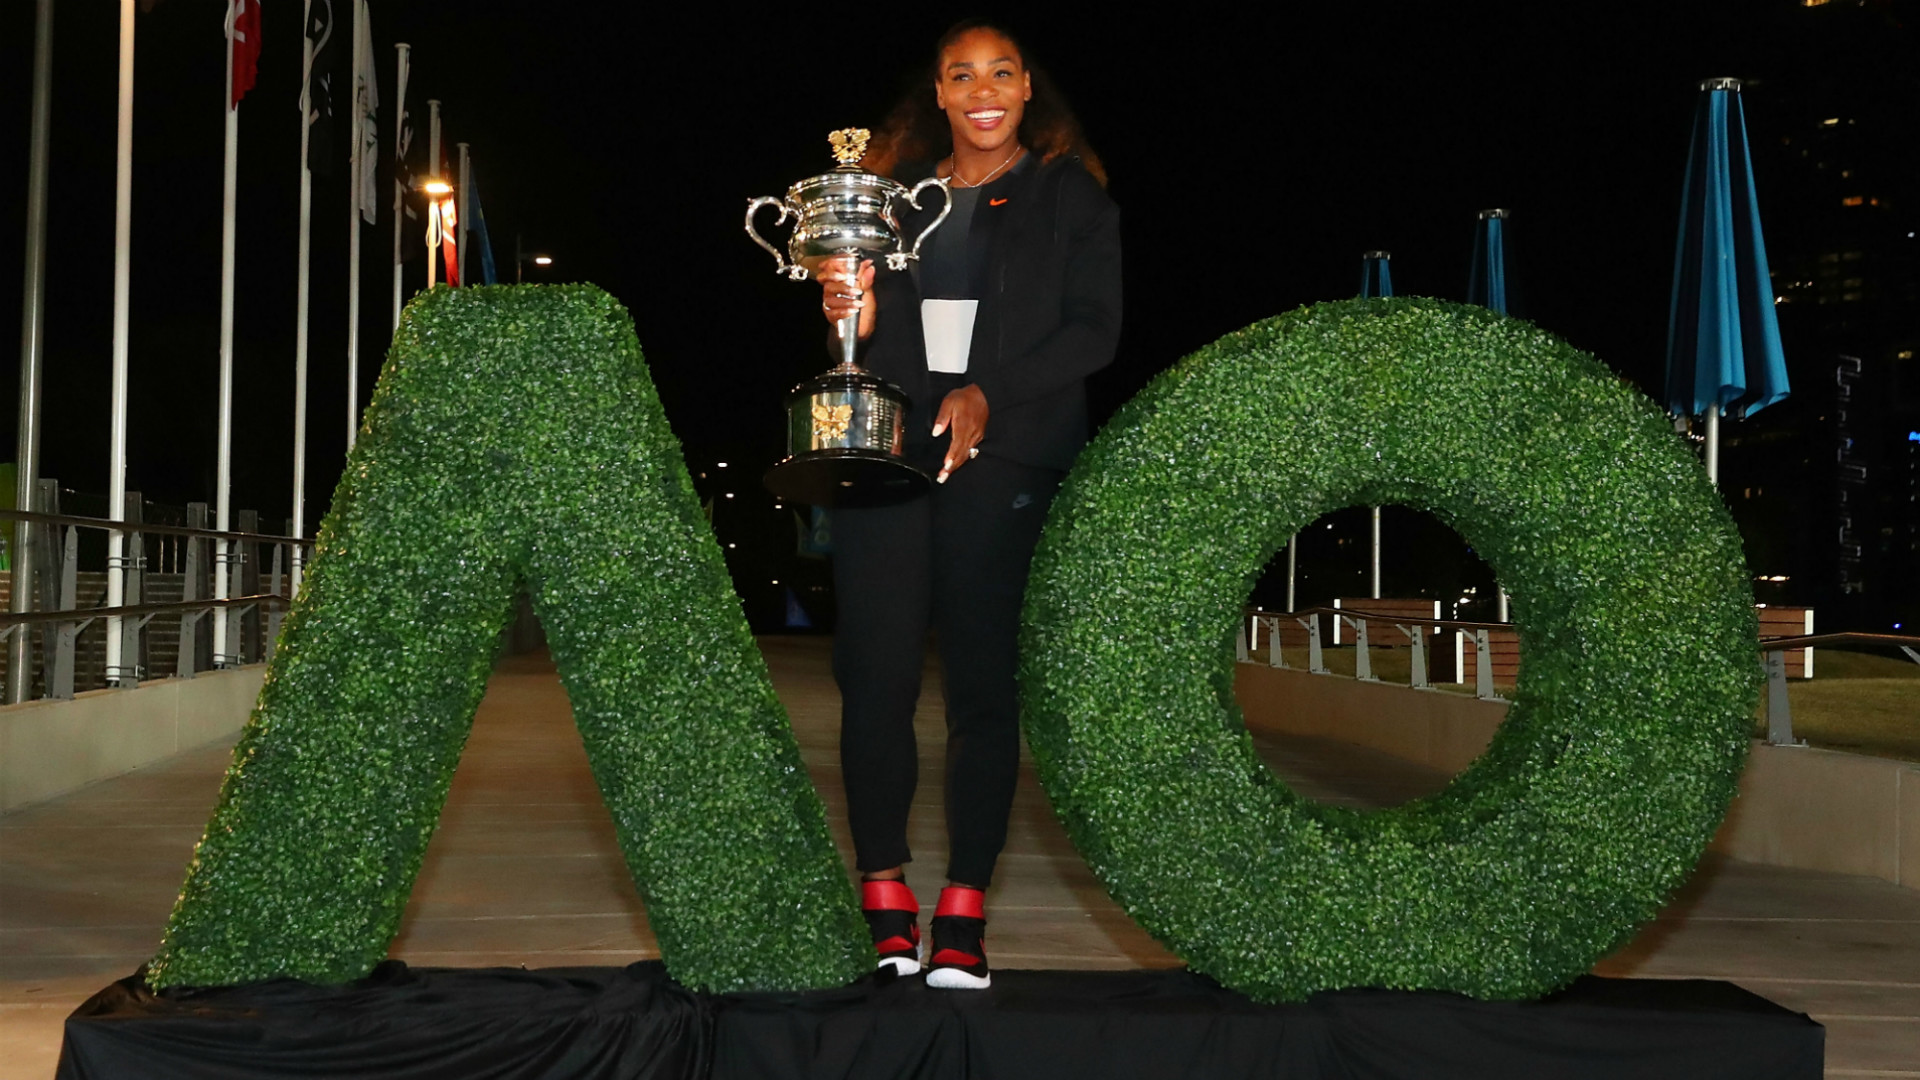 1920x1080 New mom Serena Williams hasn't ruled out defending Australian Open title |  Tennis | Sporting News